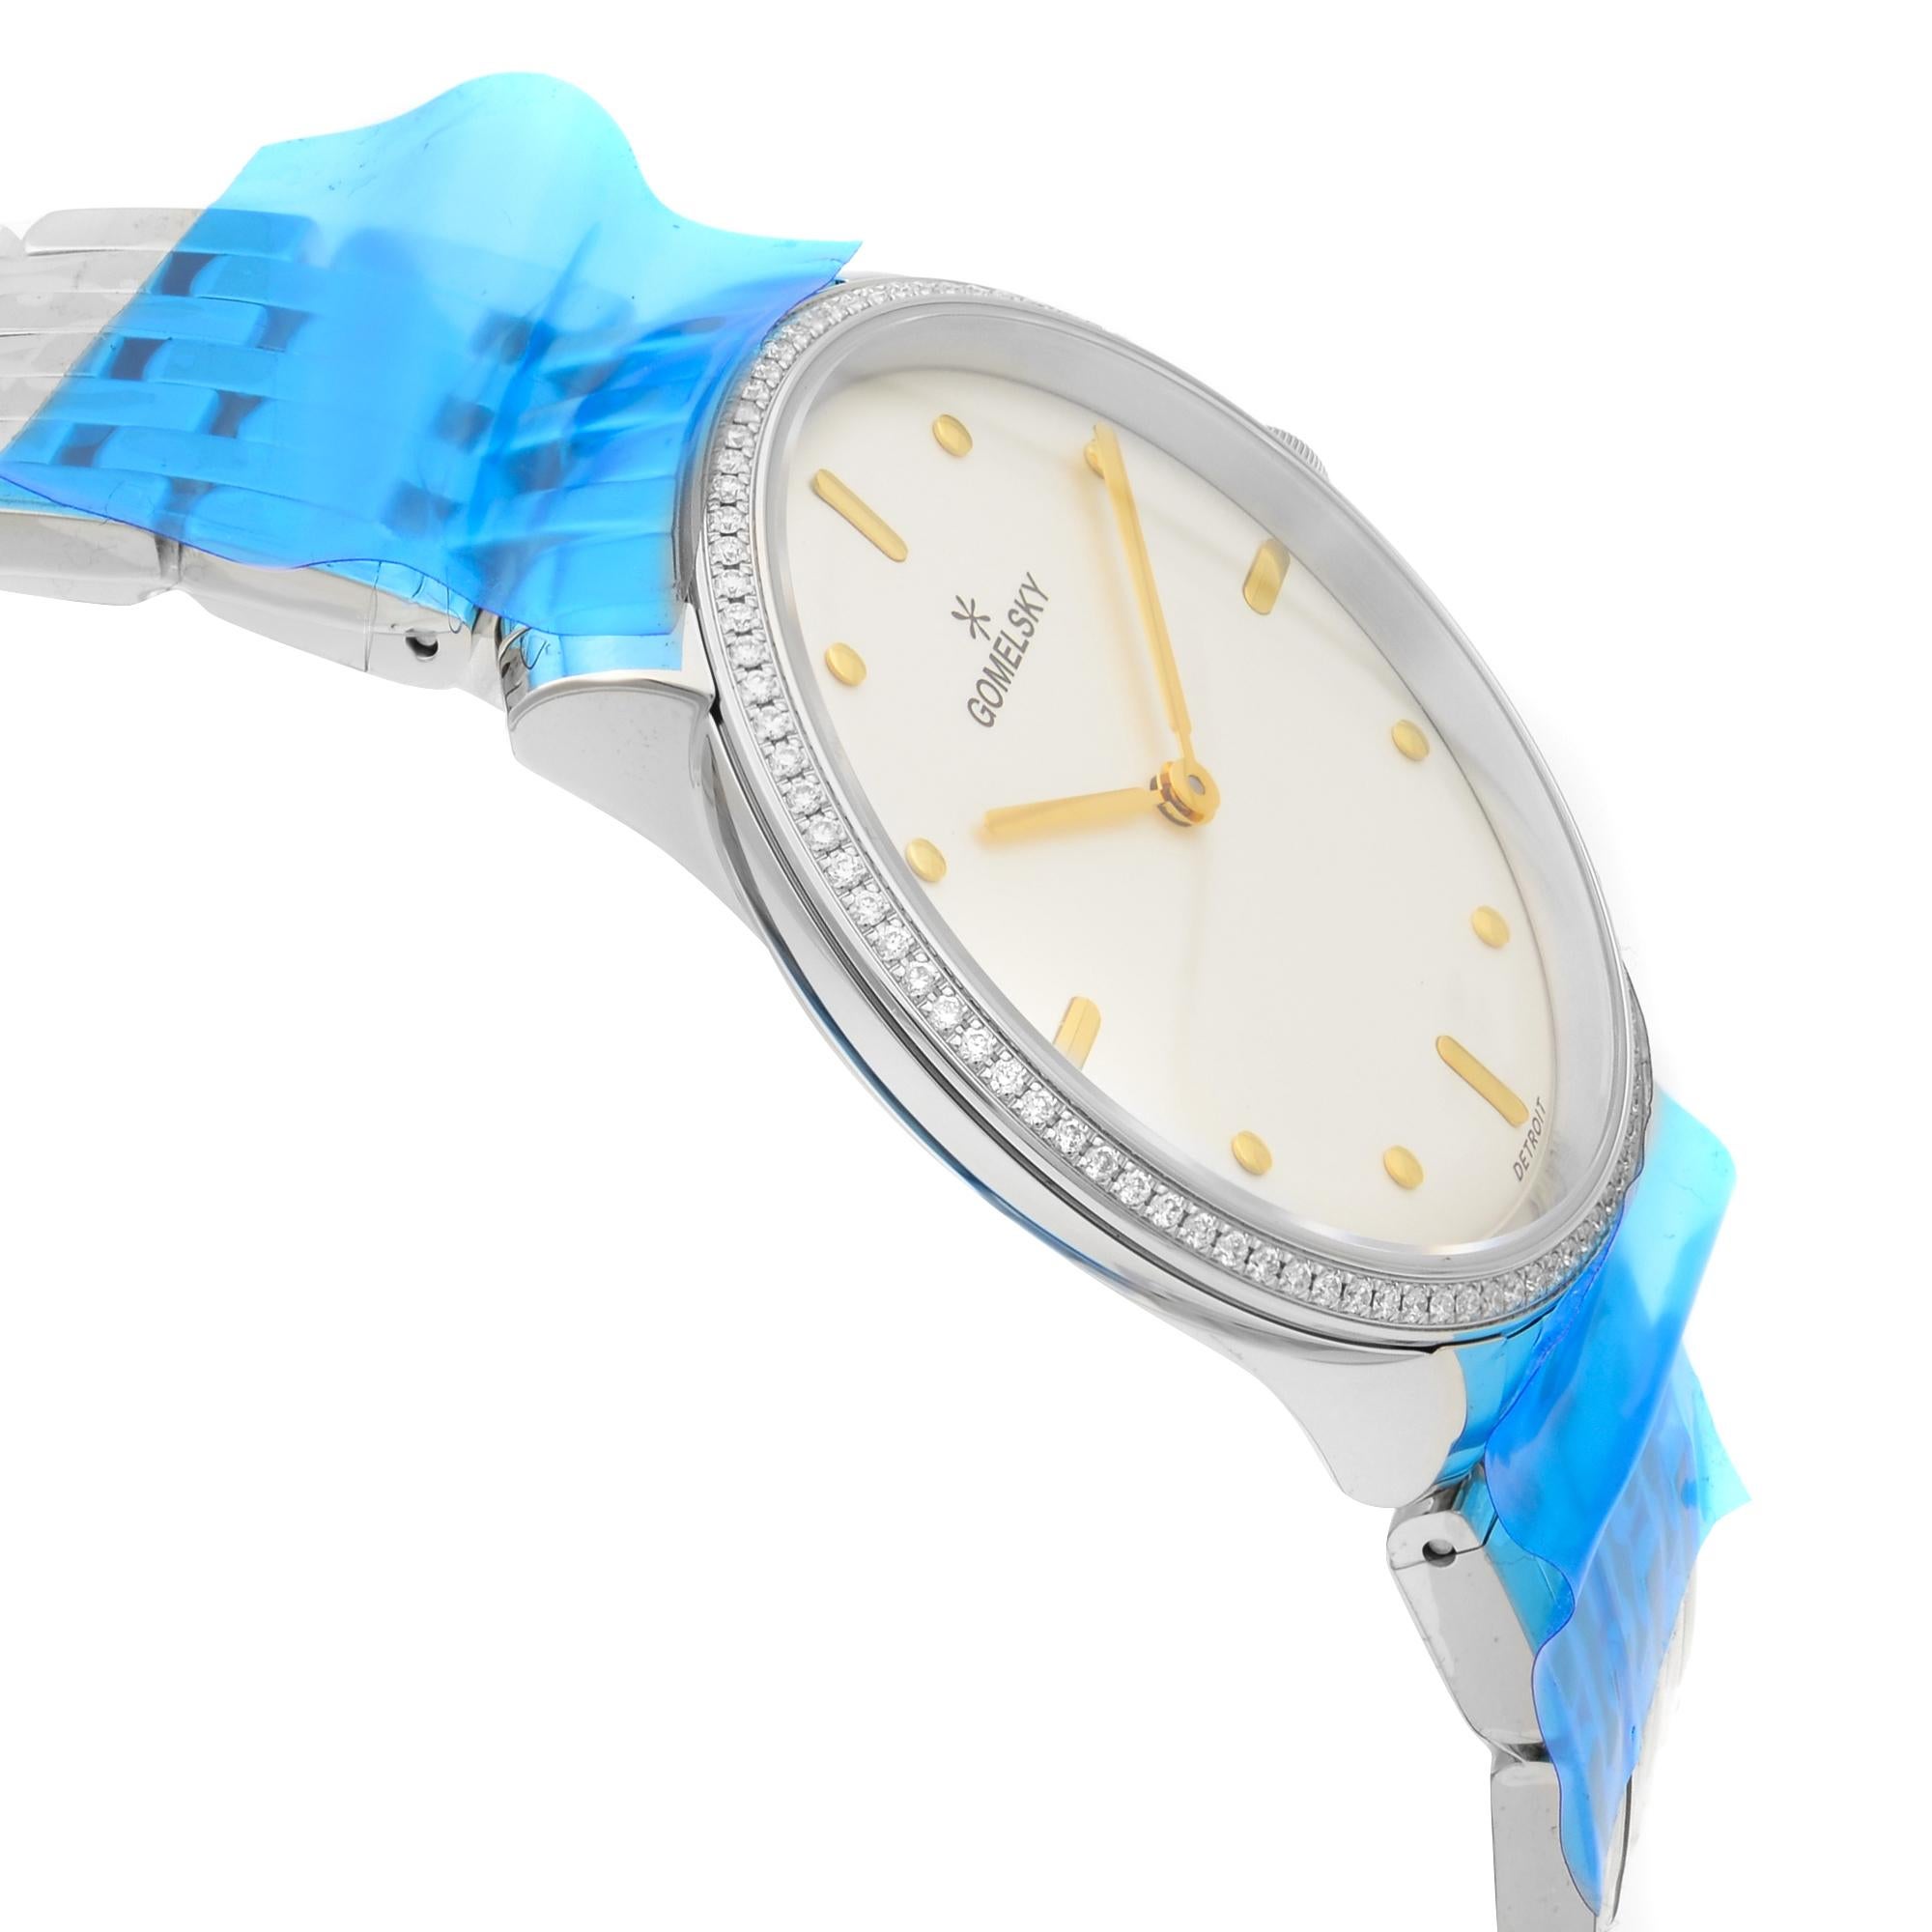 Gomelsky Audry Steel White Dial Quartz Ladies Watch G0120112281 In New Condition For Sale In New York, NY